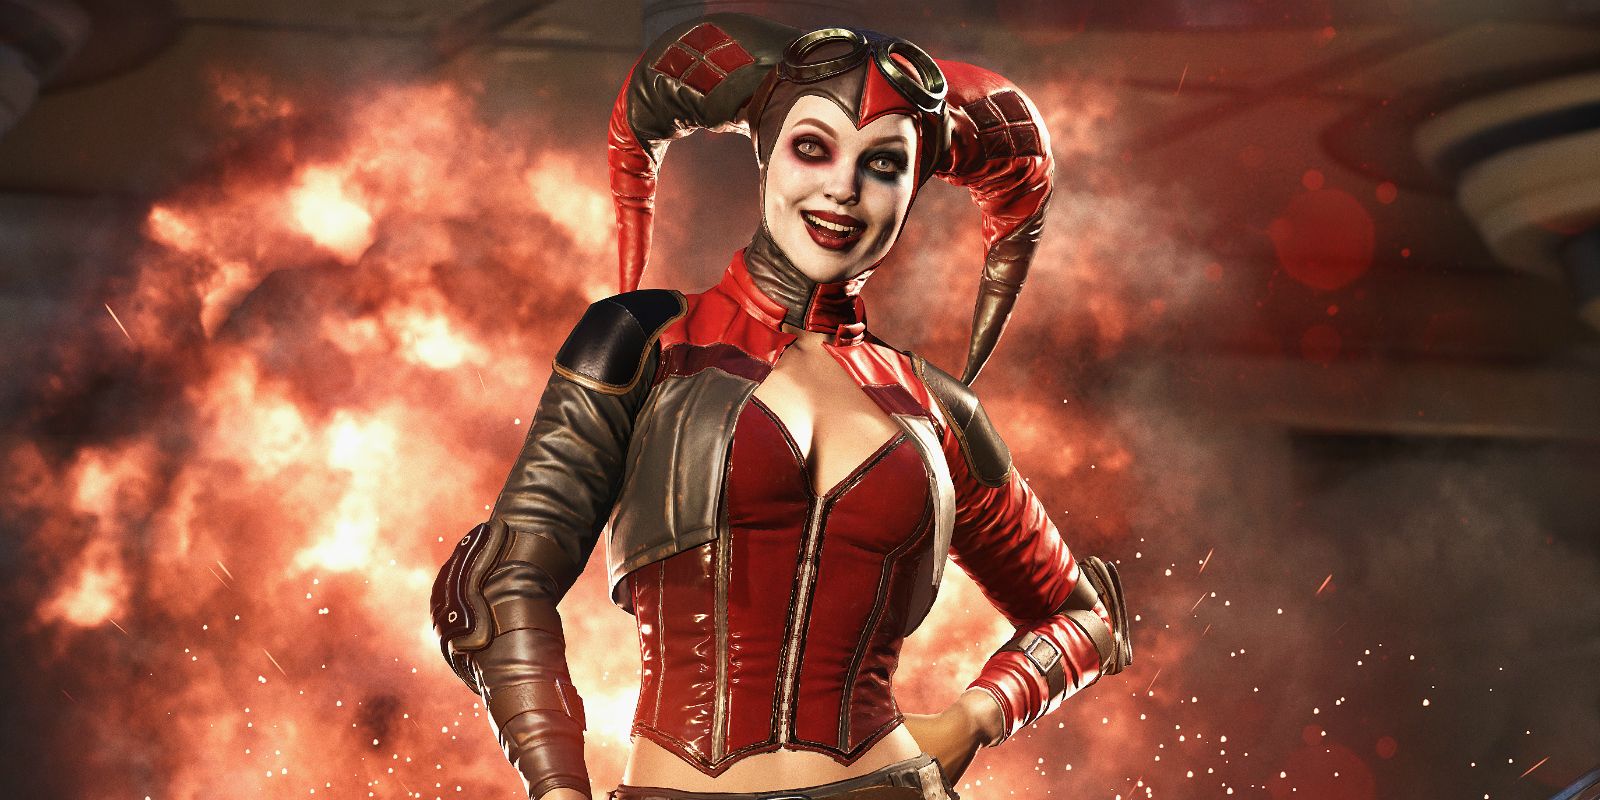 Harley Quinn in front of an explosion in Injustice 2